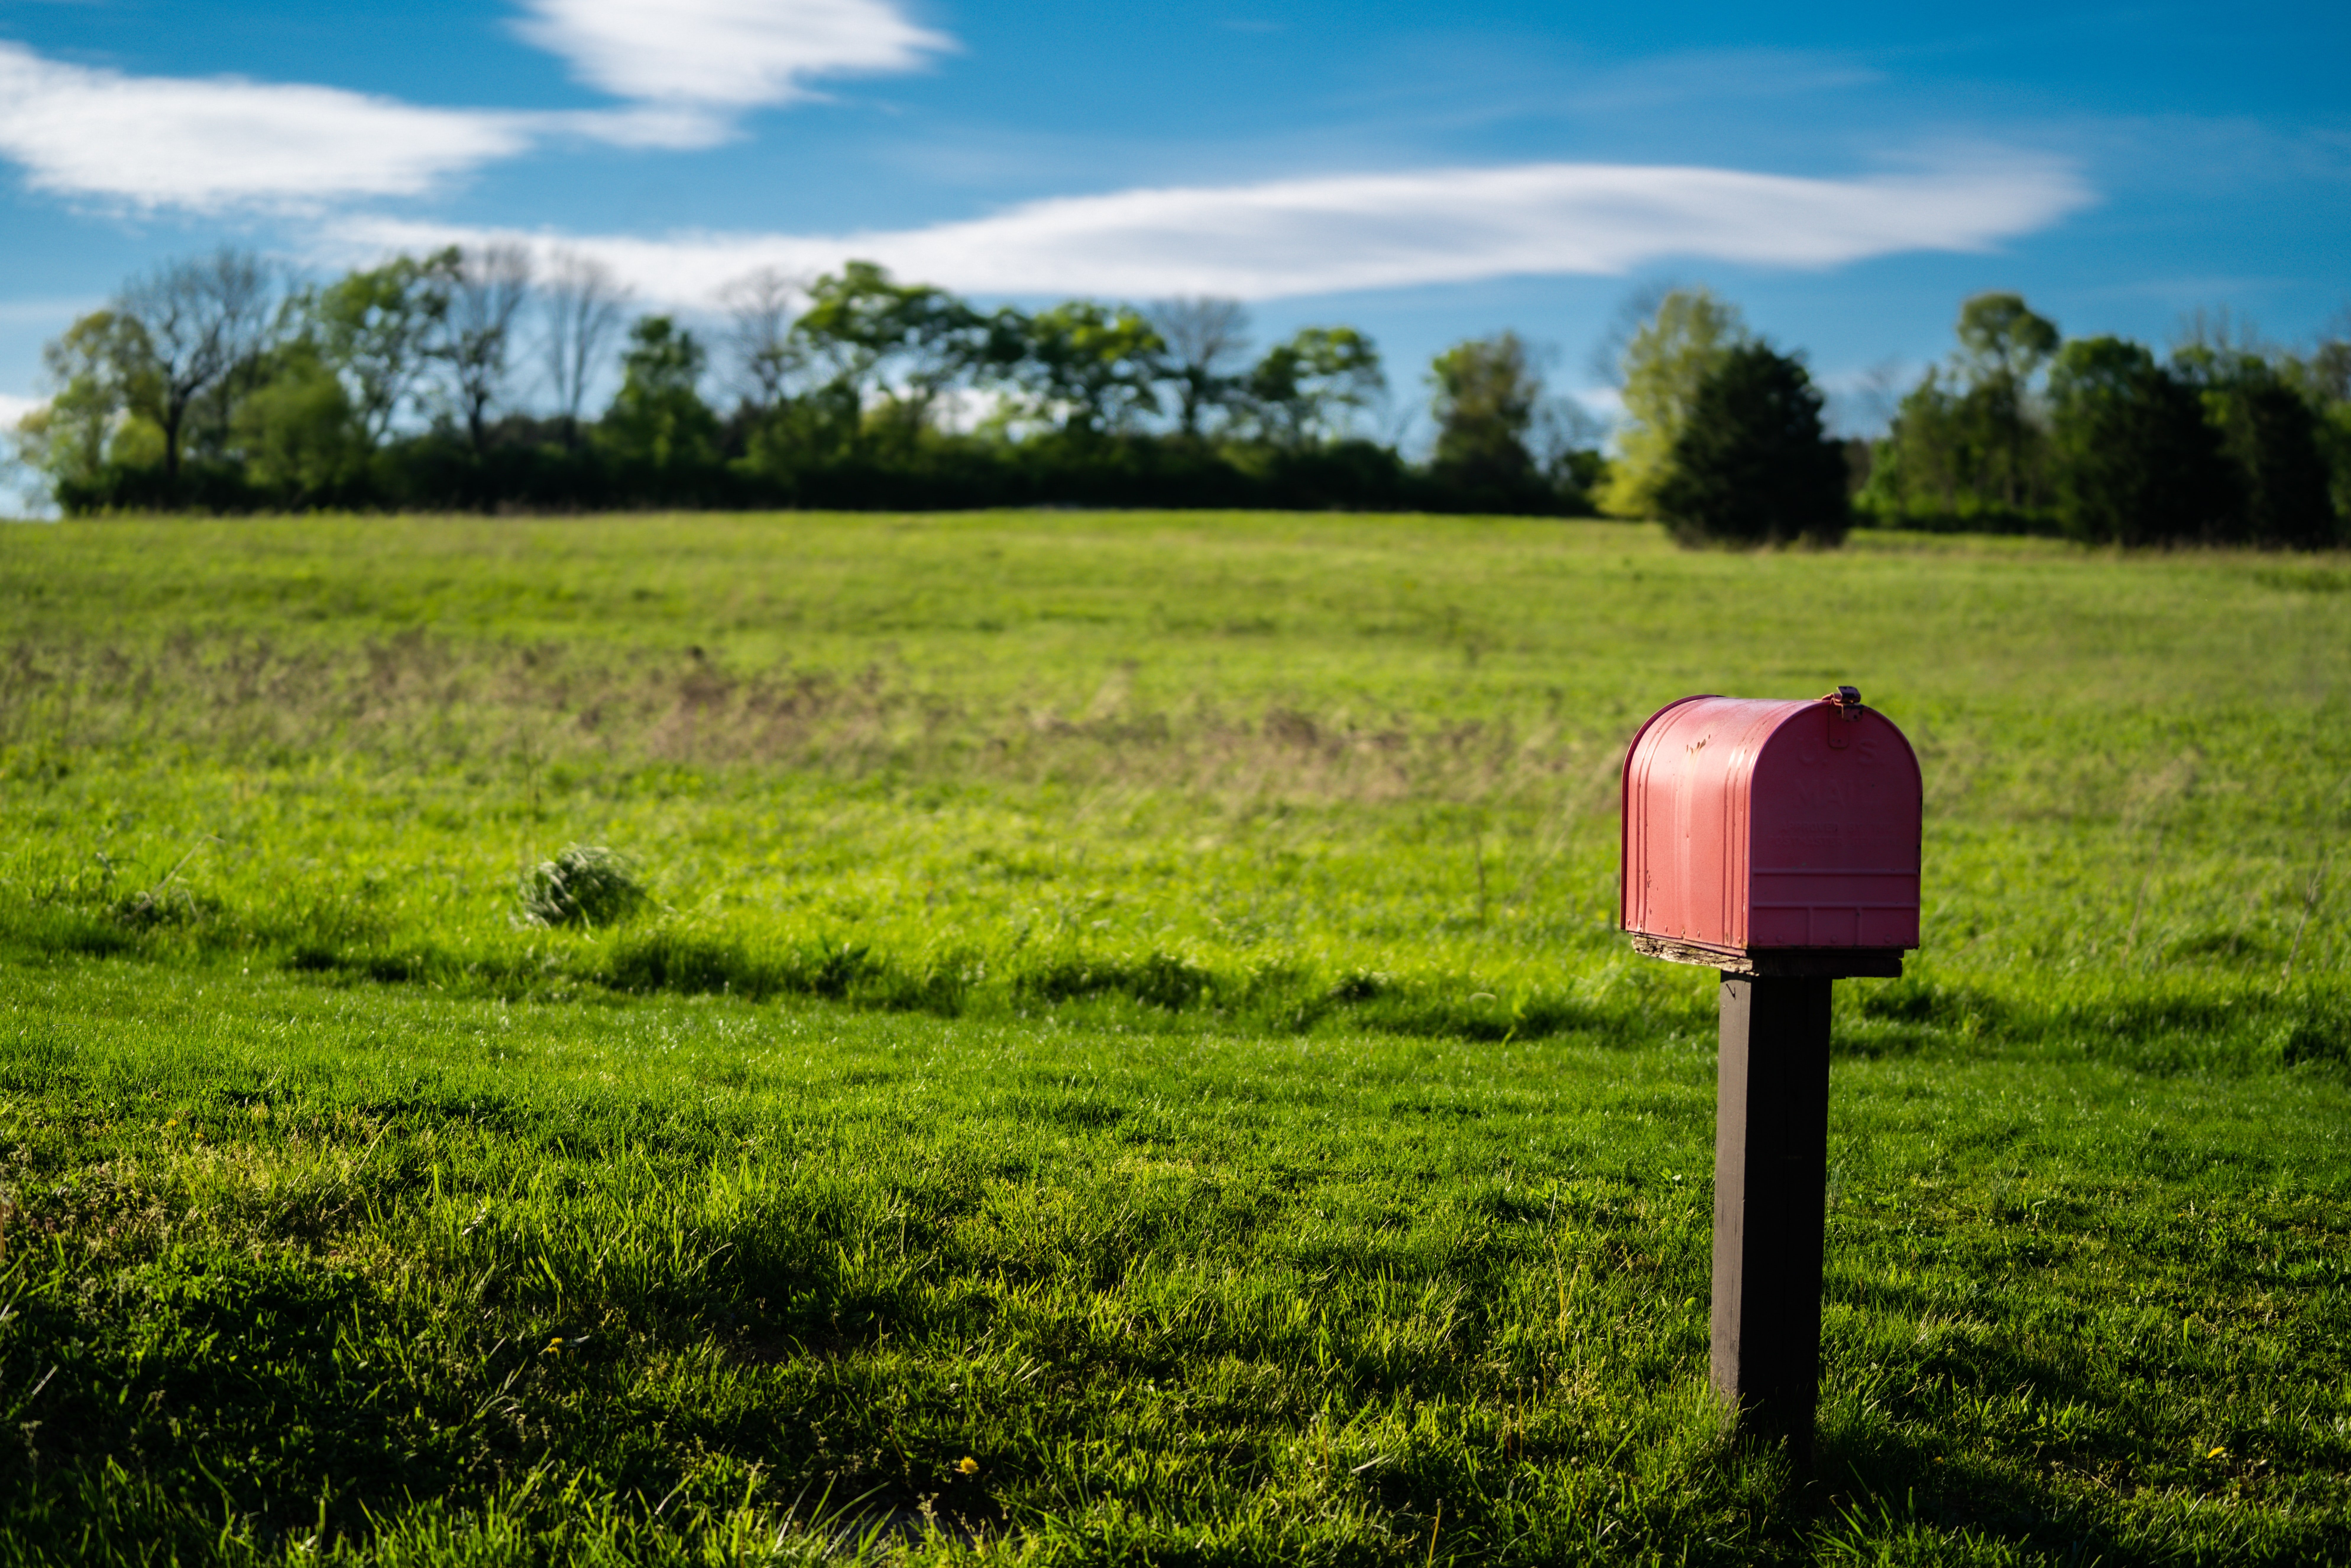 People on Reddit shared similar stories of how their mailboxes were recklessly destroyed. | Source: Unsplash